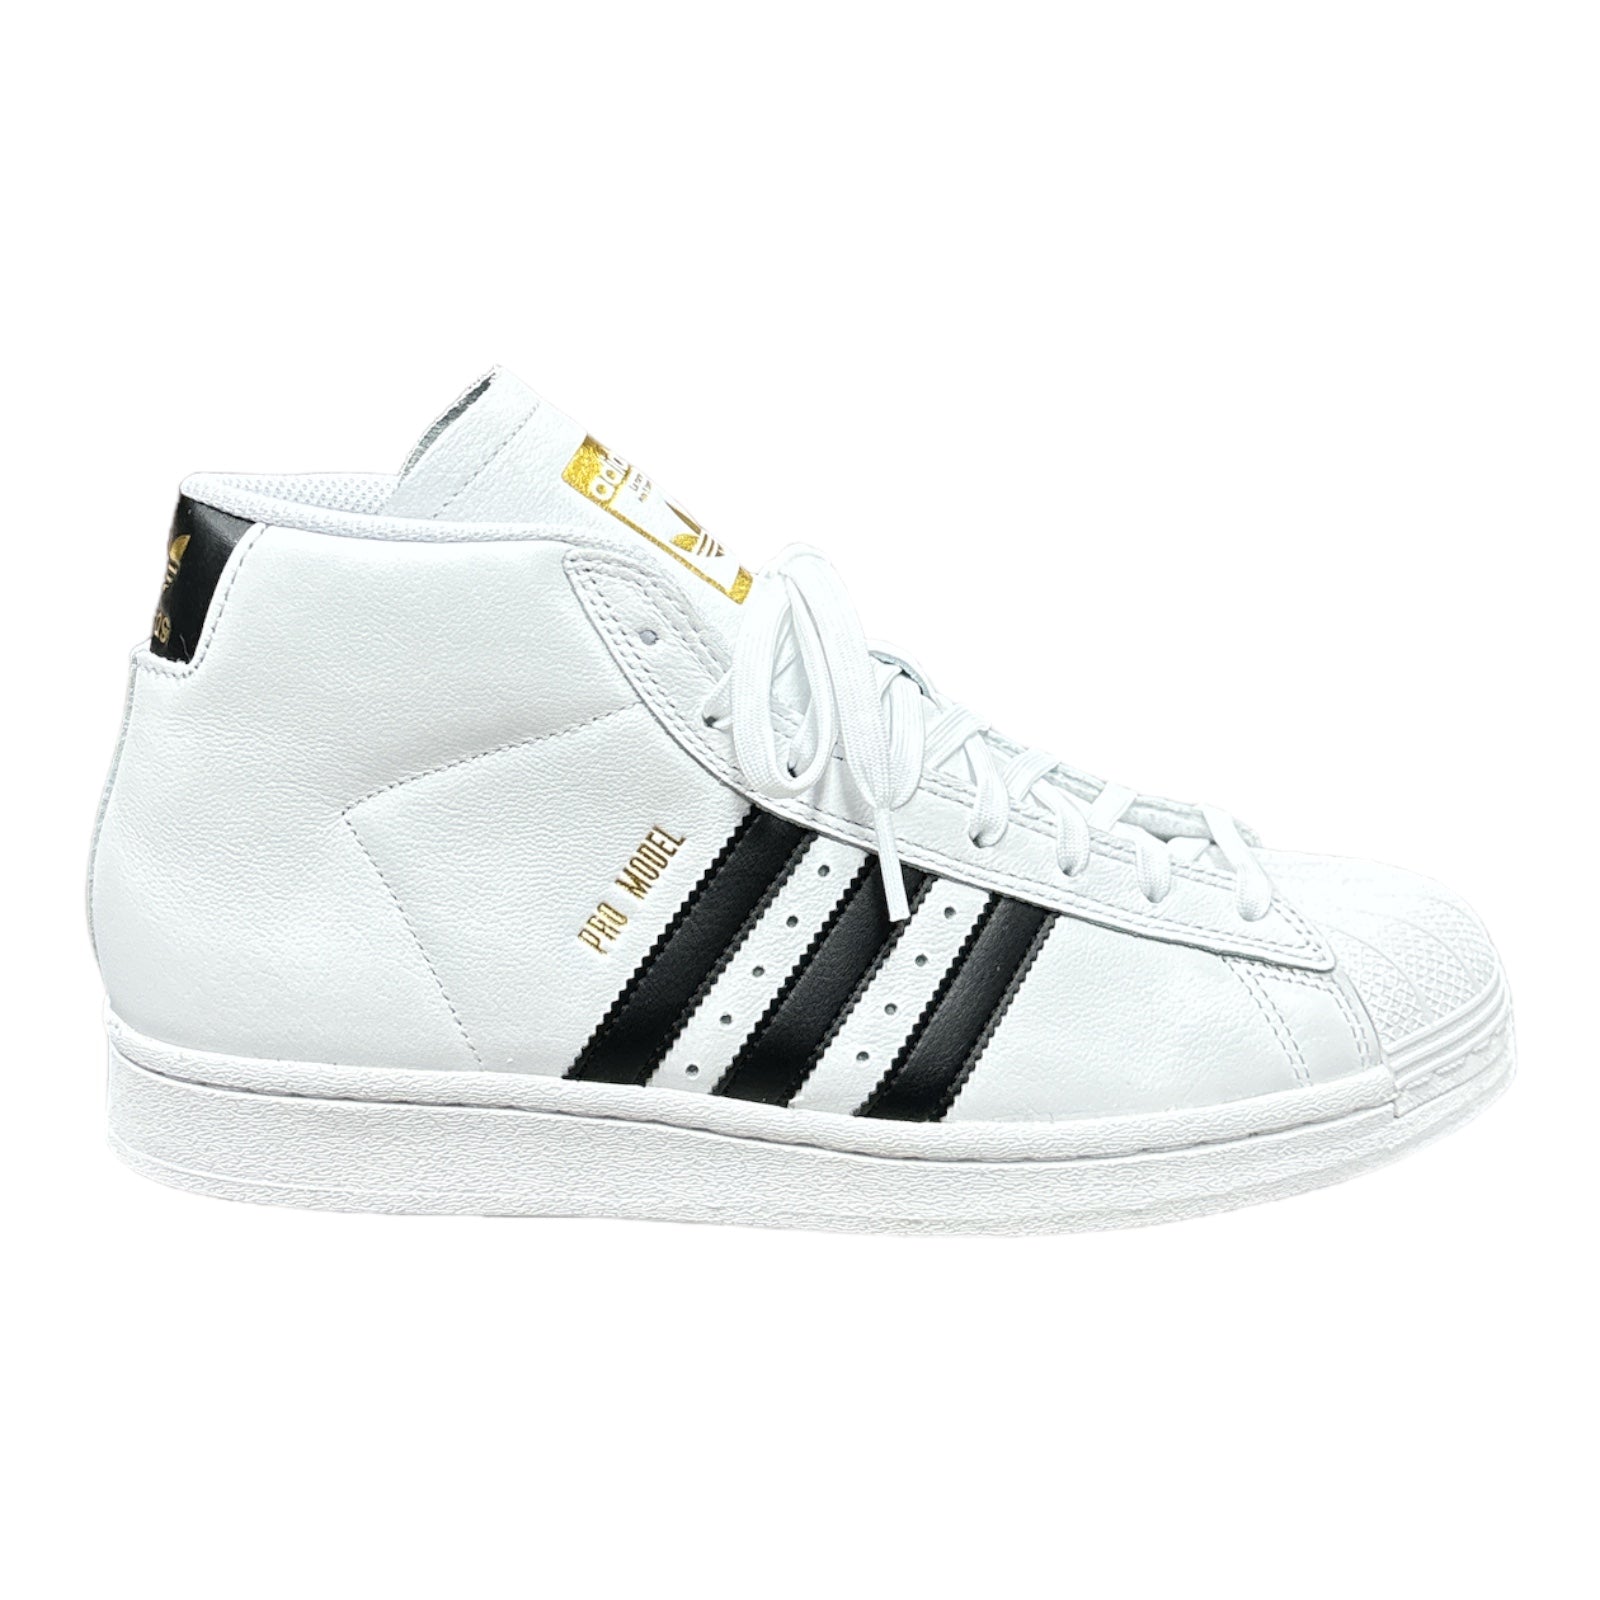 Adidas Pro Shell High Top Leather Shoe with Black Stripes.